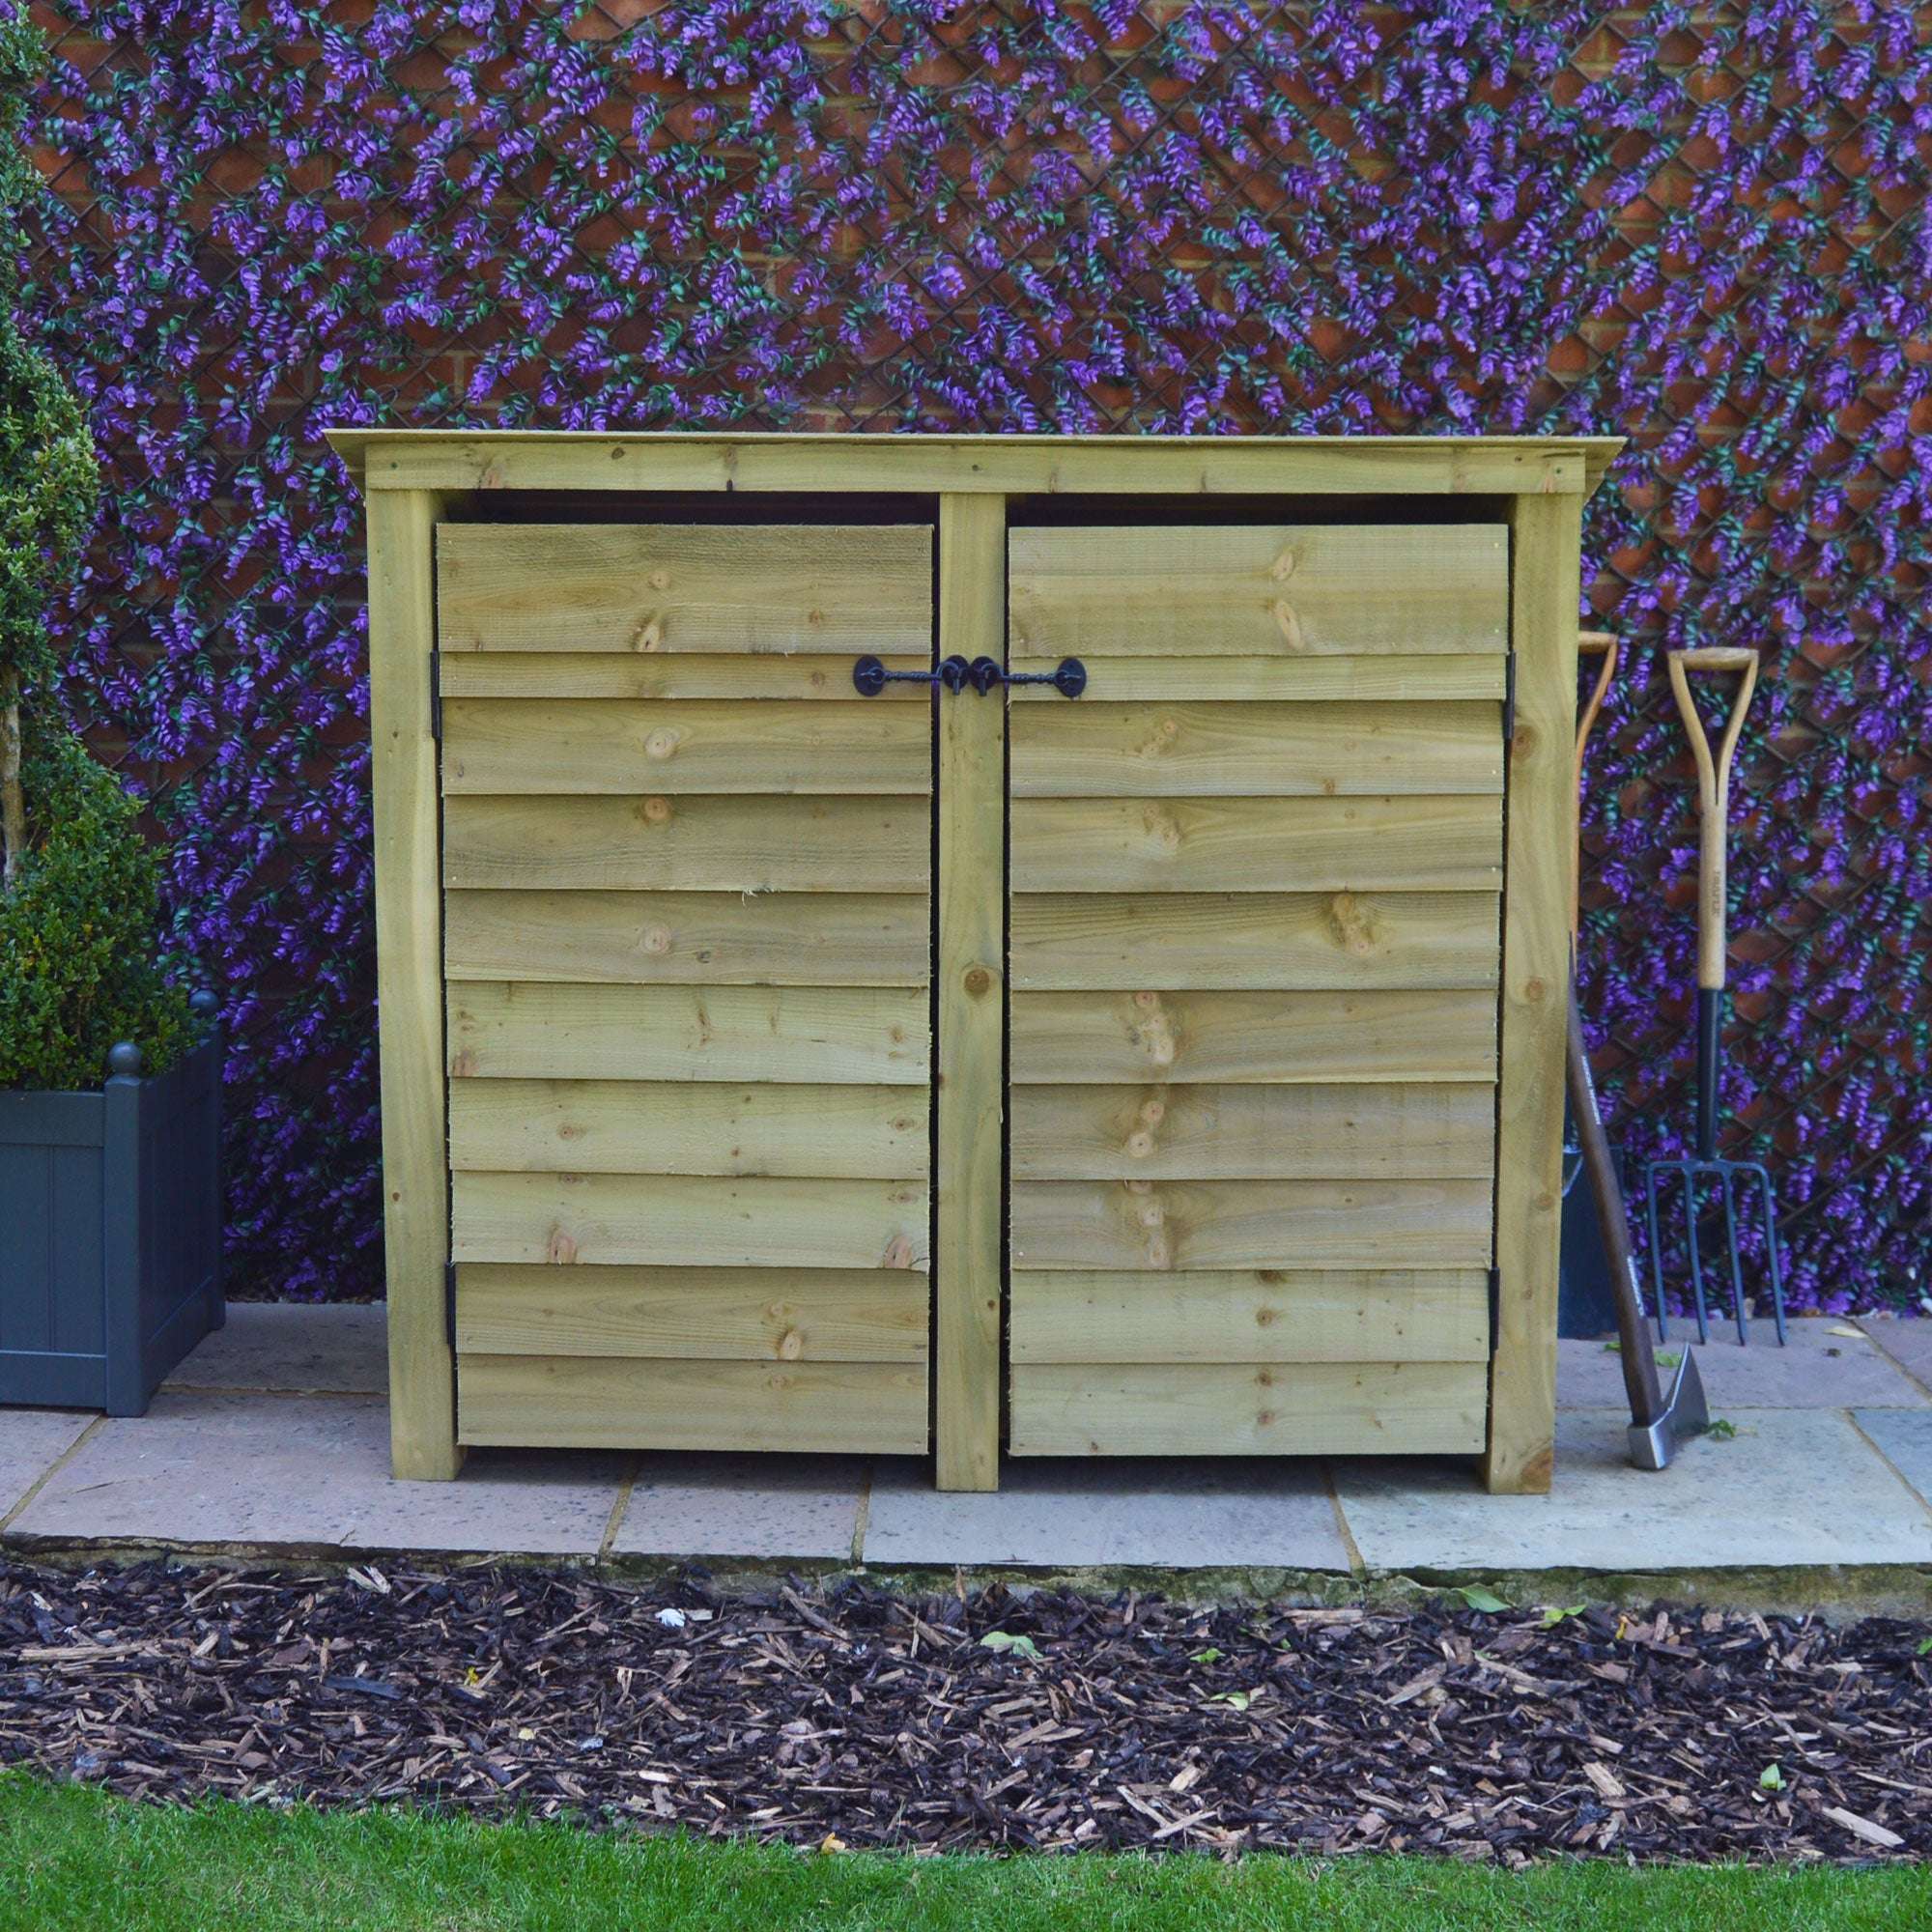 Rutland Country Cottesmore Log Store with Door - 4ft:Rutland County,Exceptional Garden